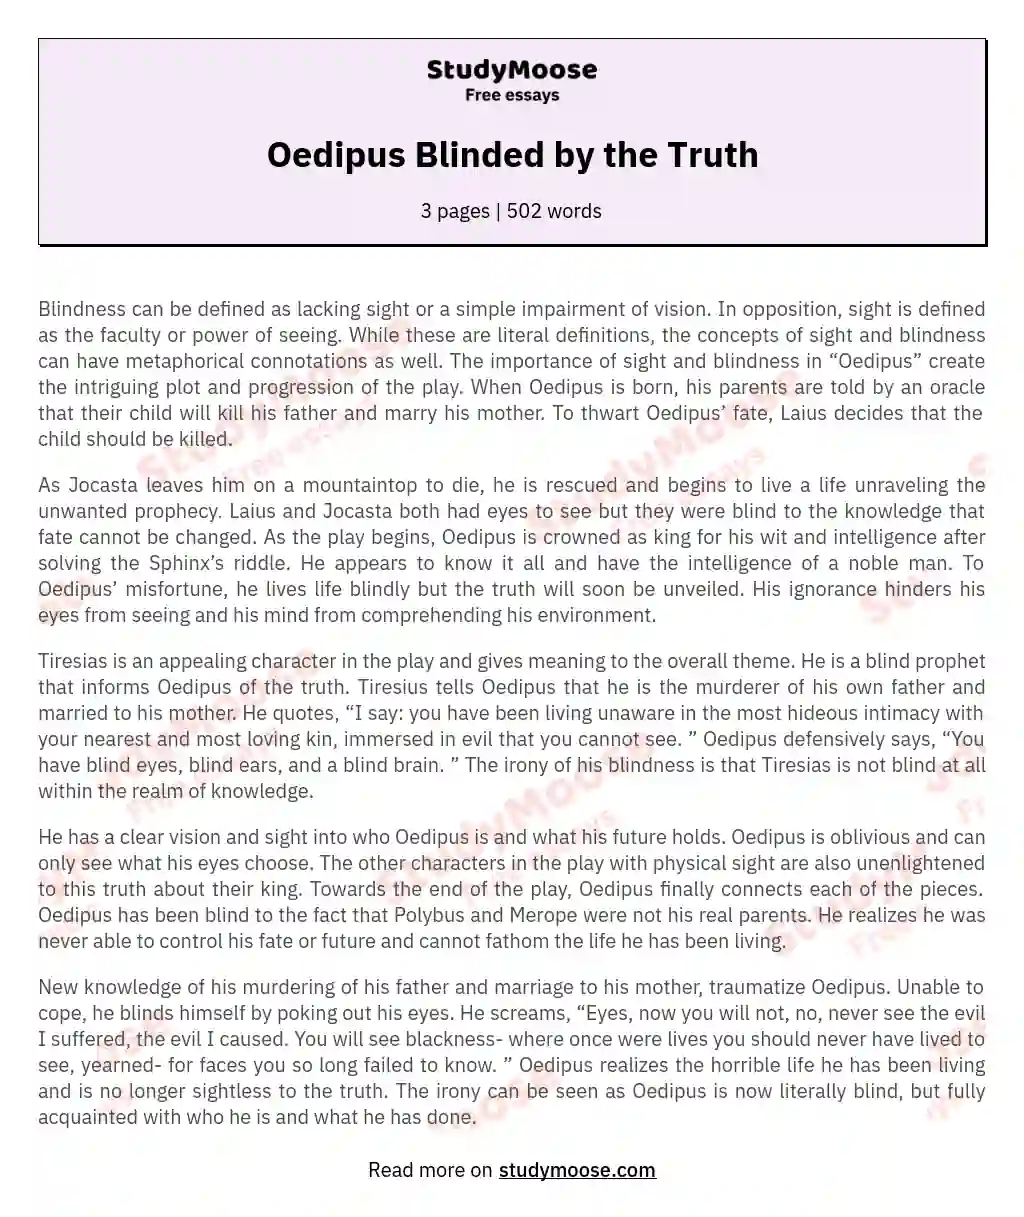 Oedipus Blinded by the Truth